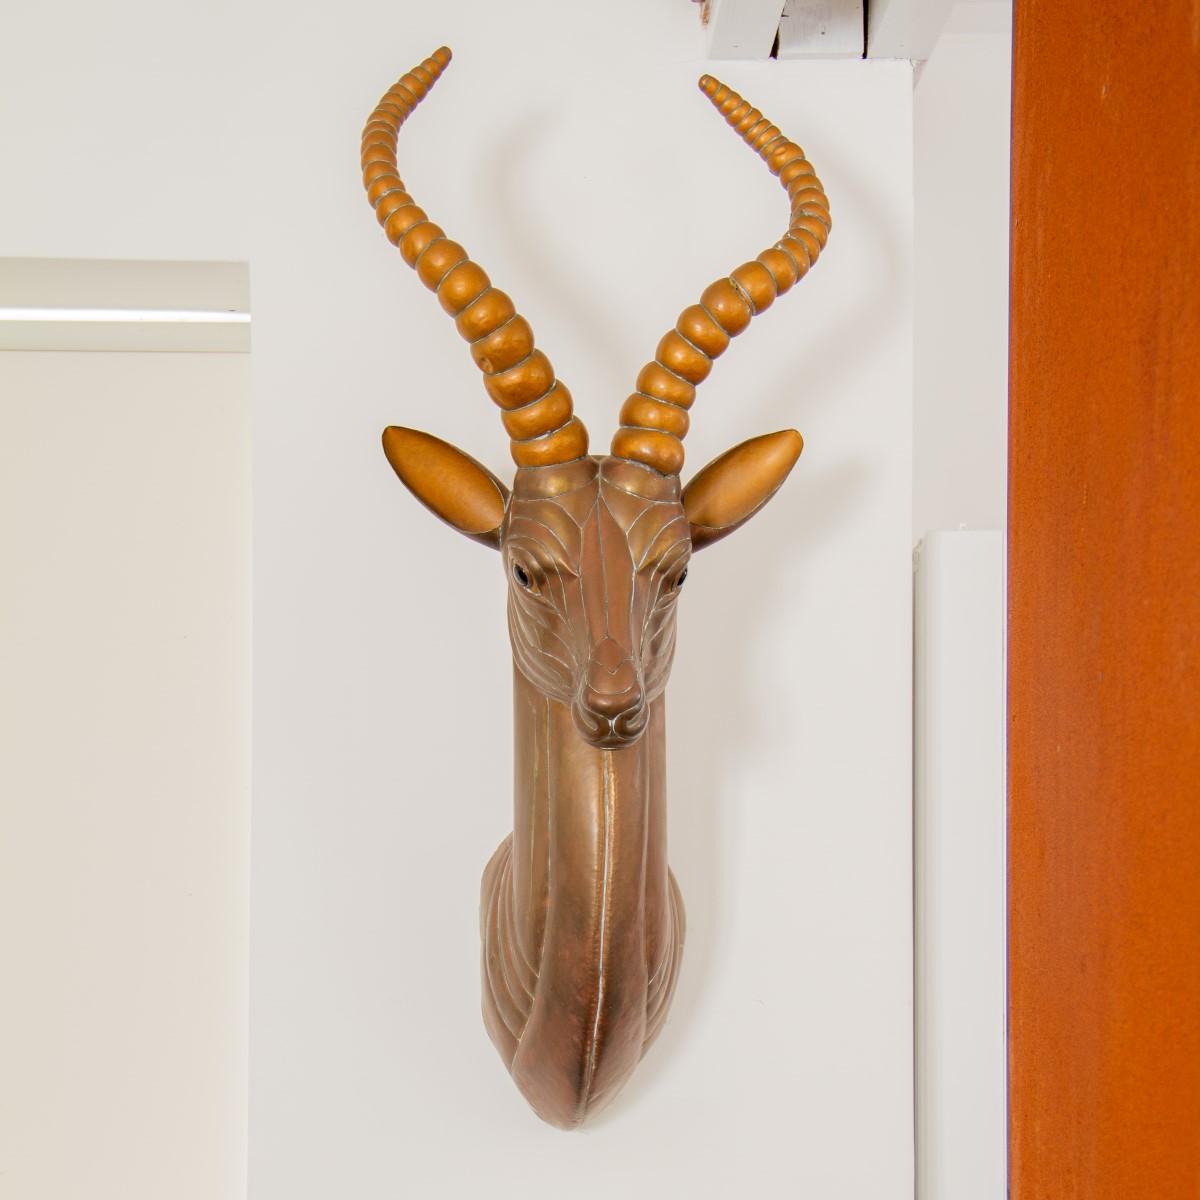 This fabulous antelope head sculpture is by the Mexican artist, Sergio Bustamante. This antelope head wall hanging sculpture, comprised of mixed brass and copper, with contrasting patination of the horns and ears, would work great in a within a